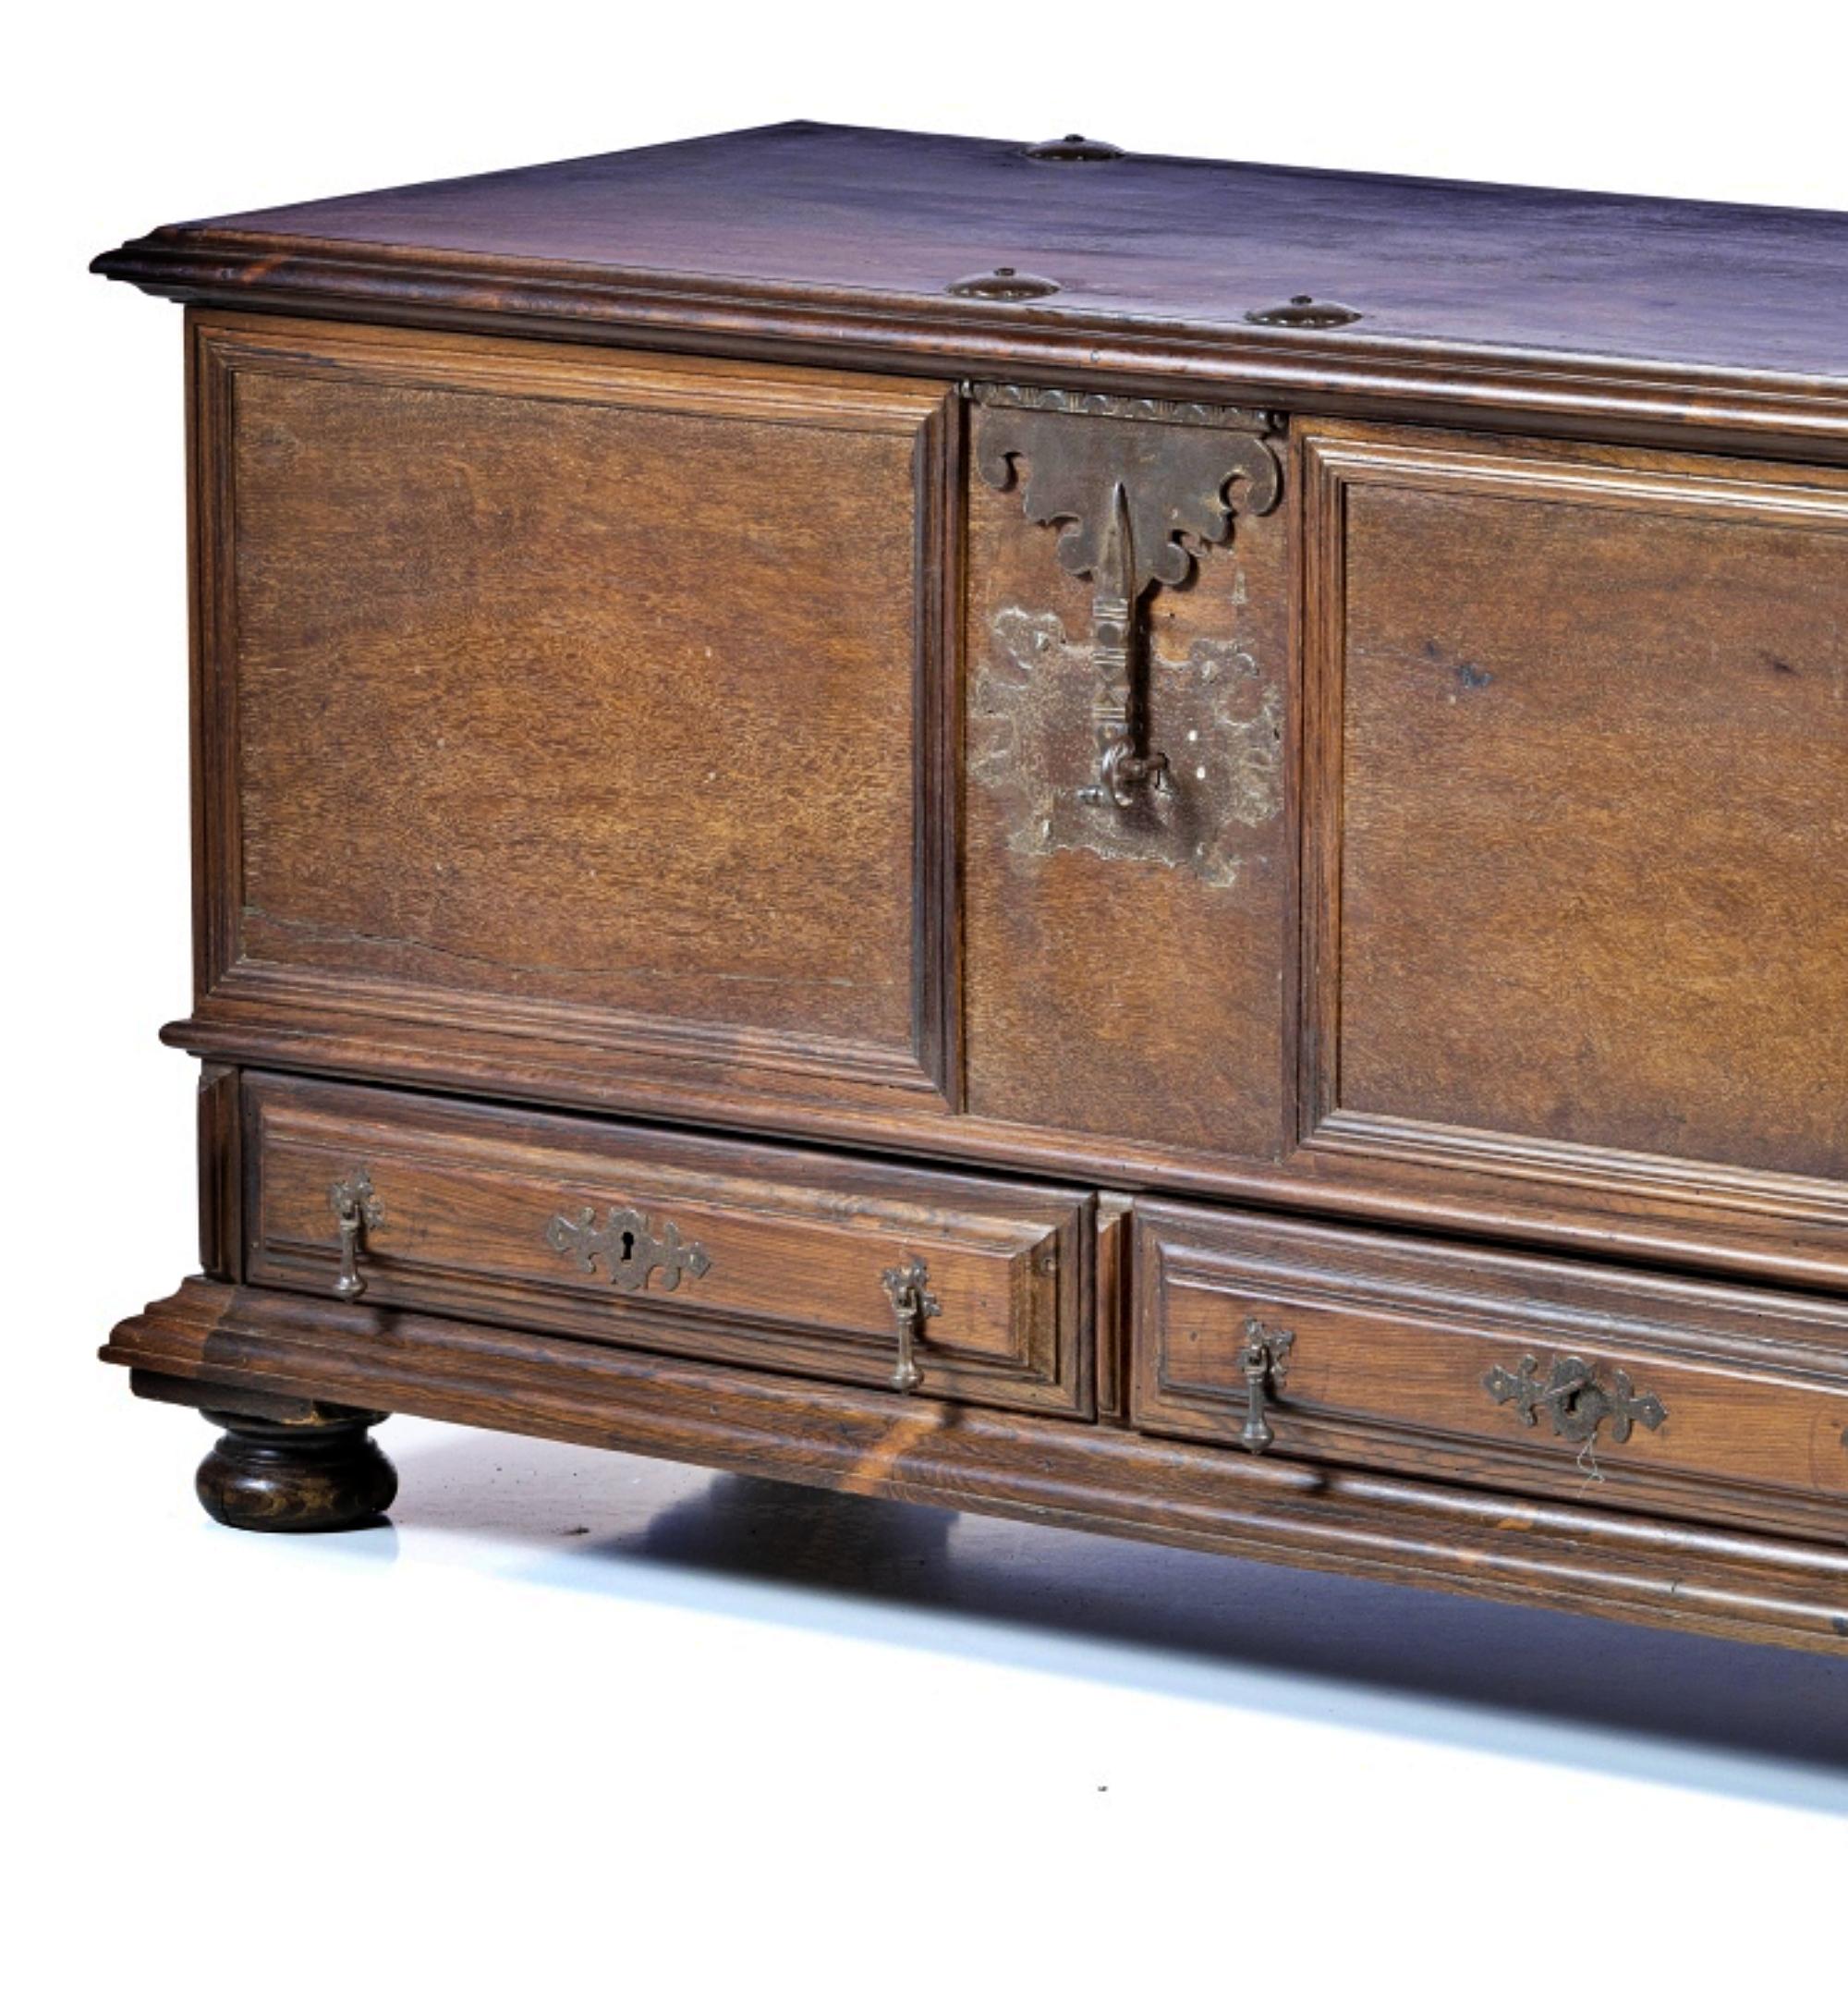 PORTUGUESE ROSEWOOD CHEST WITH TWO DRAWERS 17th century

Portuguese from the 17th century, 
in sicupira and rosewood, cut and pierced iron fittings. 
DIM.: 70 x 125 x 58 cm
Good conditions.